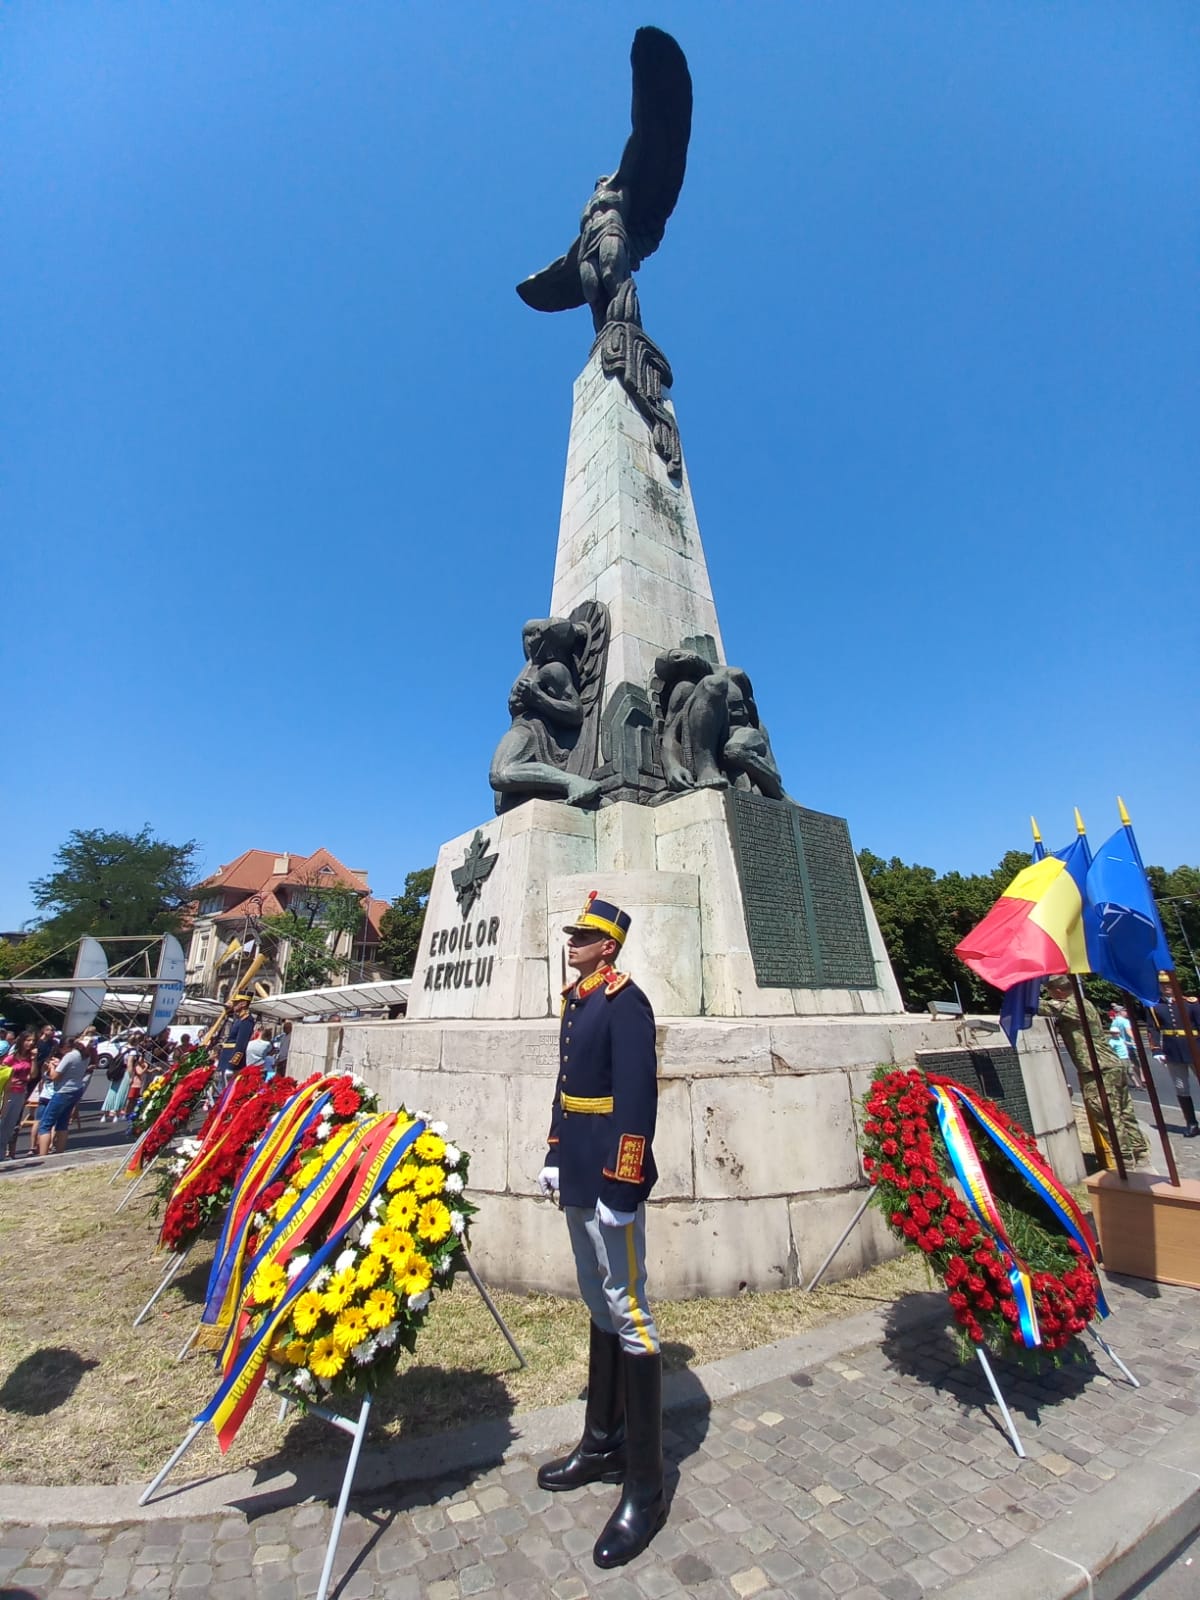 Image shows Romanian soldier standing by poppy wreaths and statue.